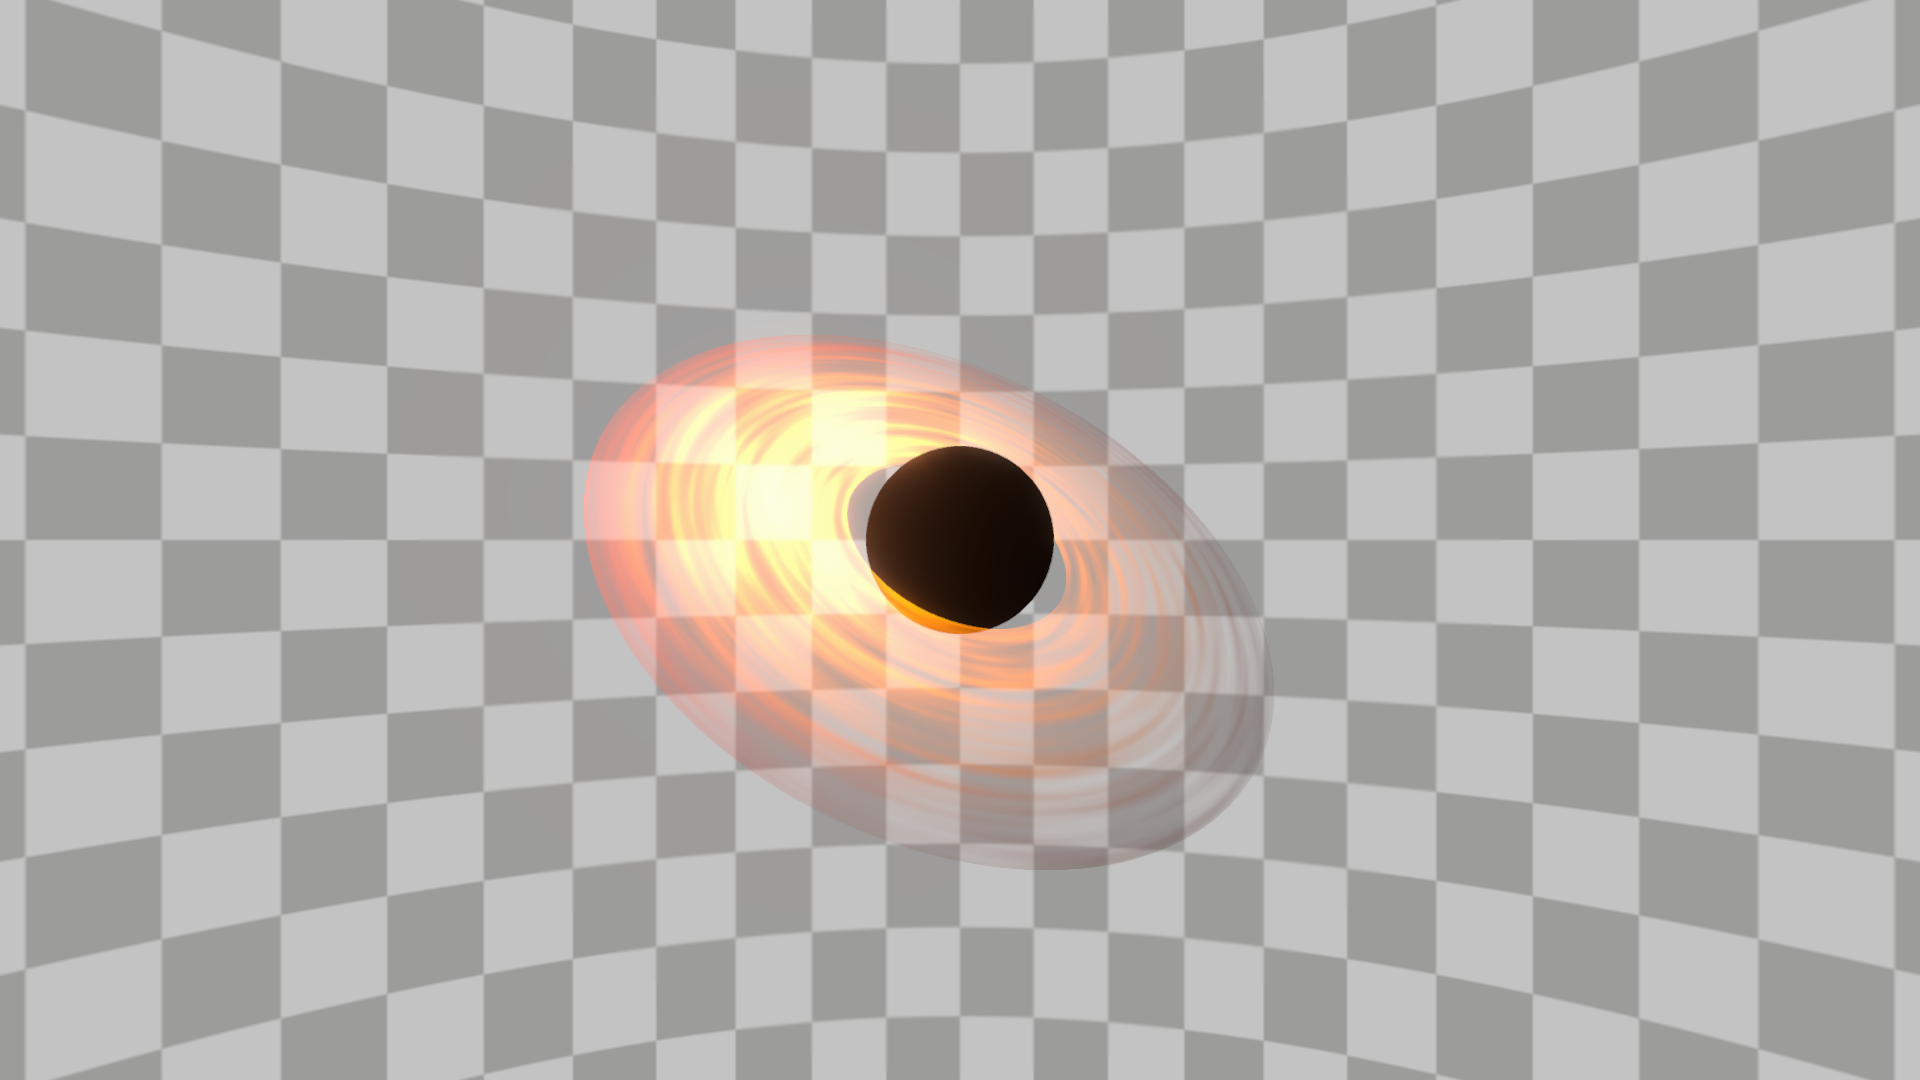 Still image of the black hole and accretion disc. <b>_SSRadius</b> set to 0.2.